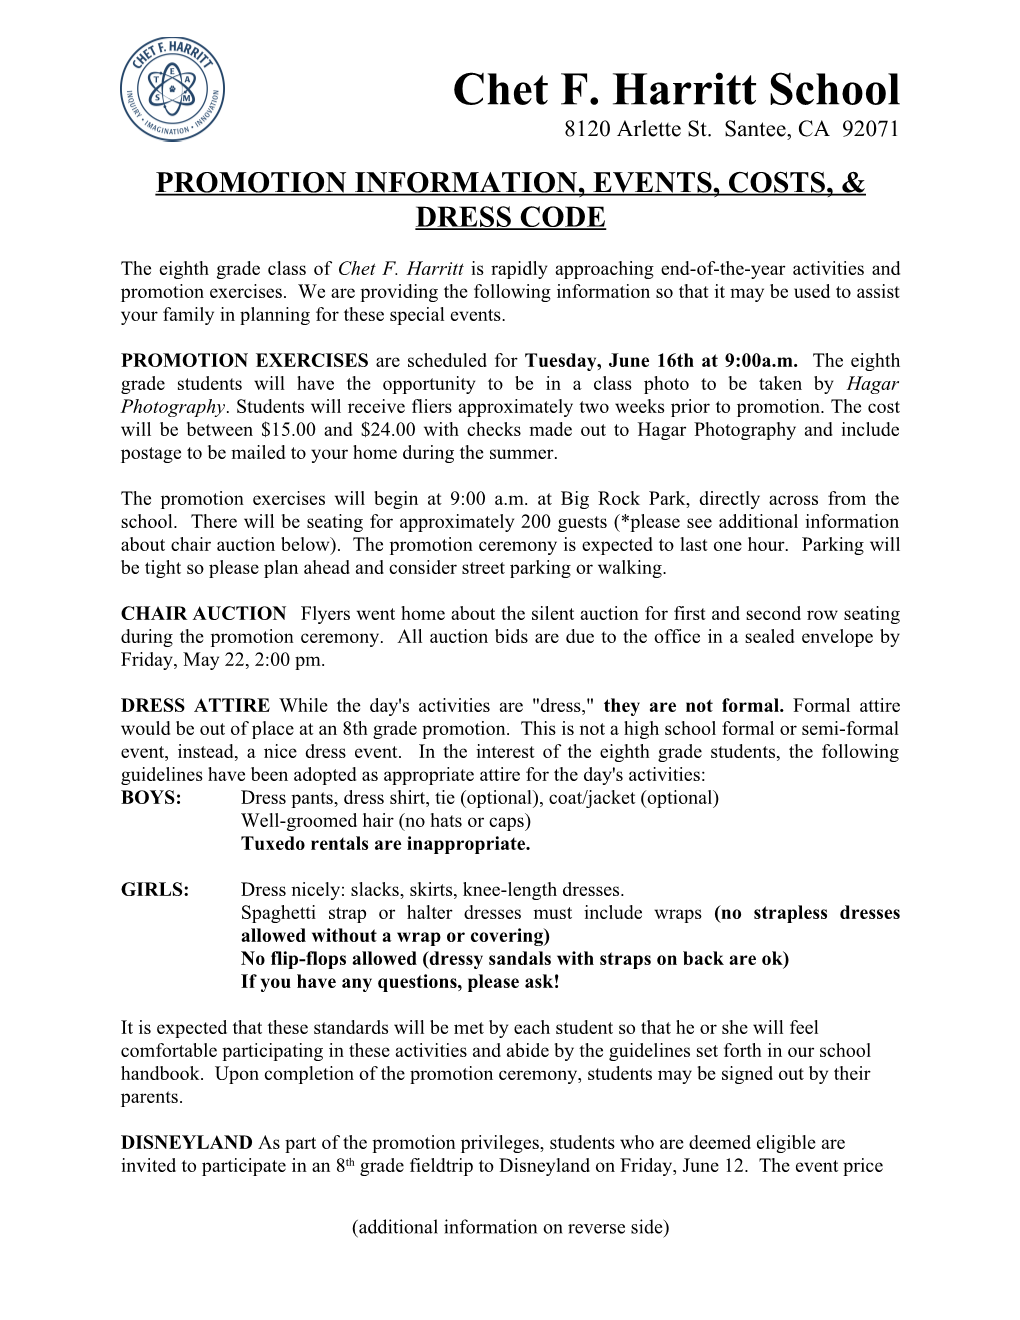 Promotion Information, Events, Costs, & Dress Code